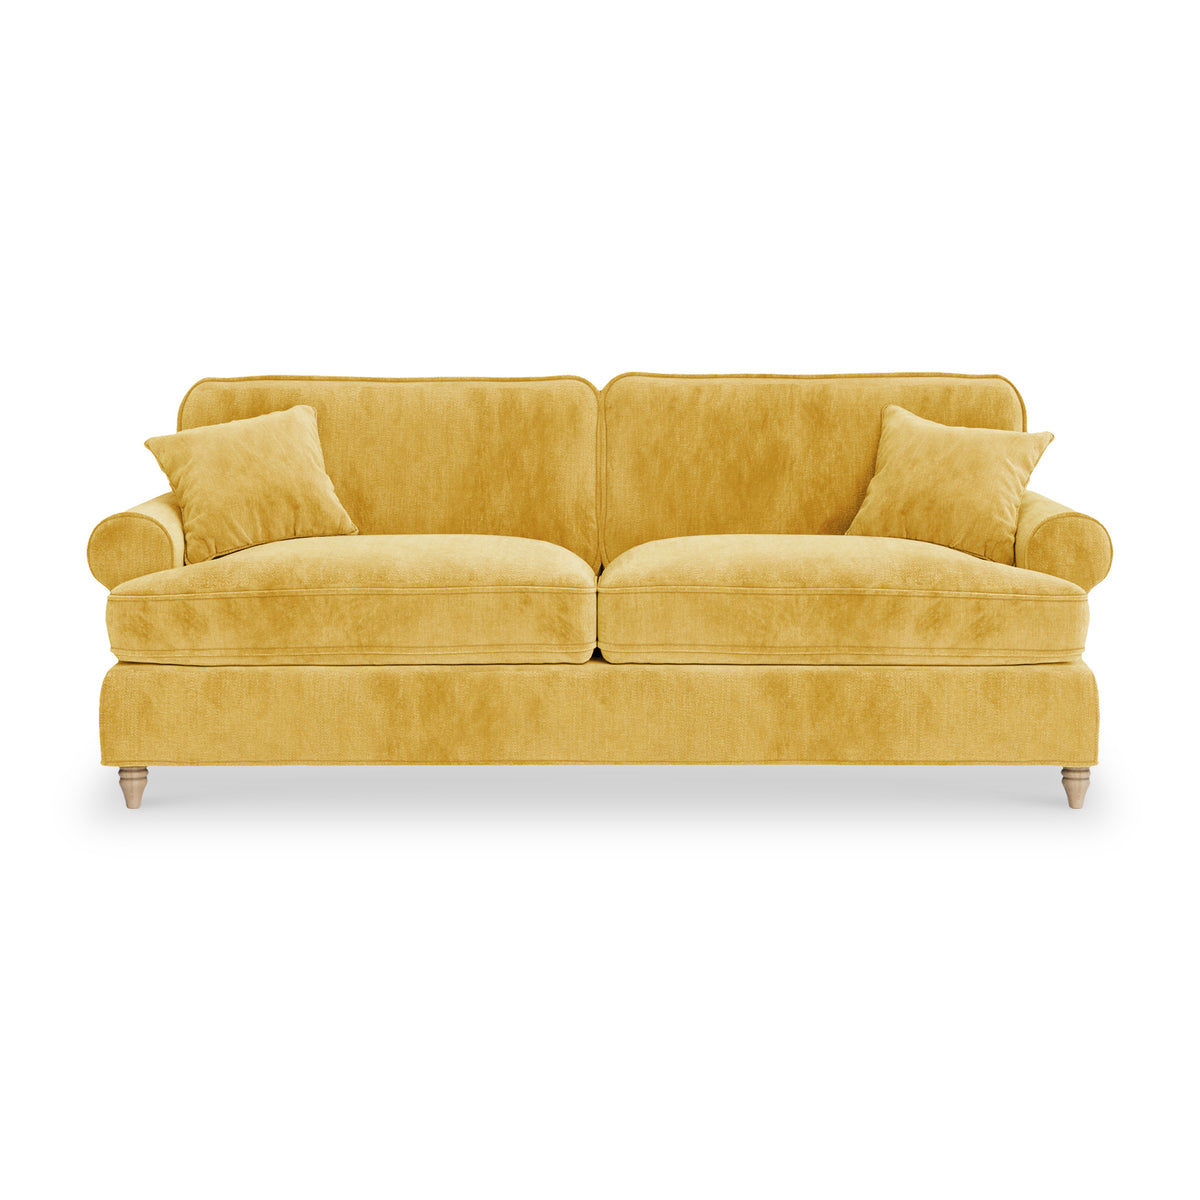 Alfie Gold 4 Seater Sofa from Roseland Furniture